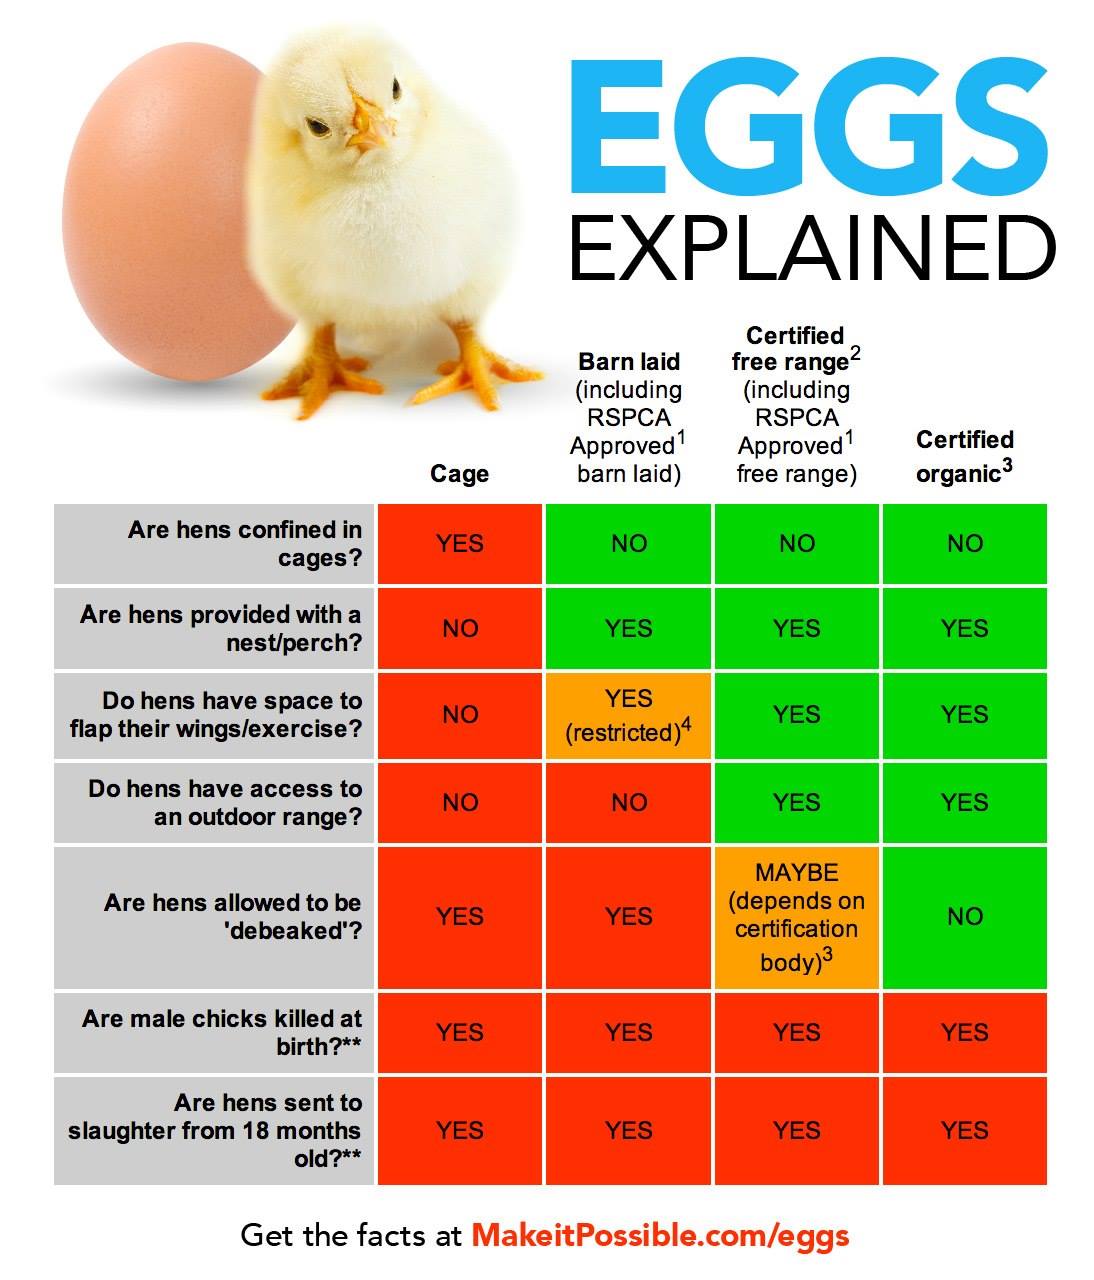 Egg-citing Benefits of Free-Range Eggs: Quality, Nutrition, and Ethics